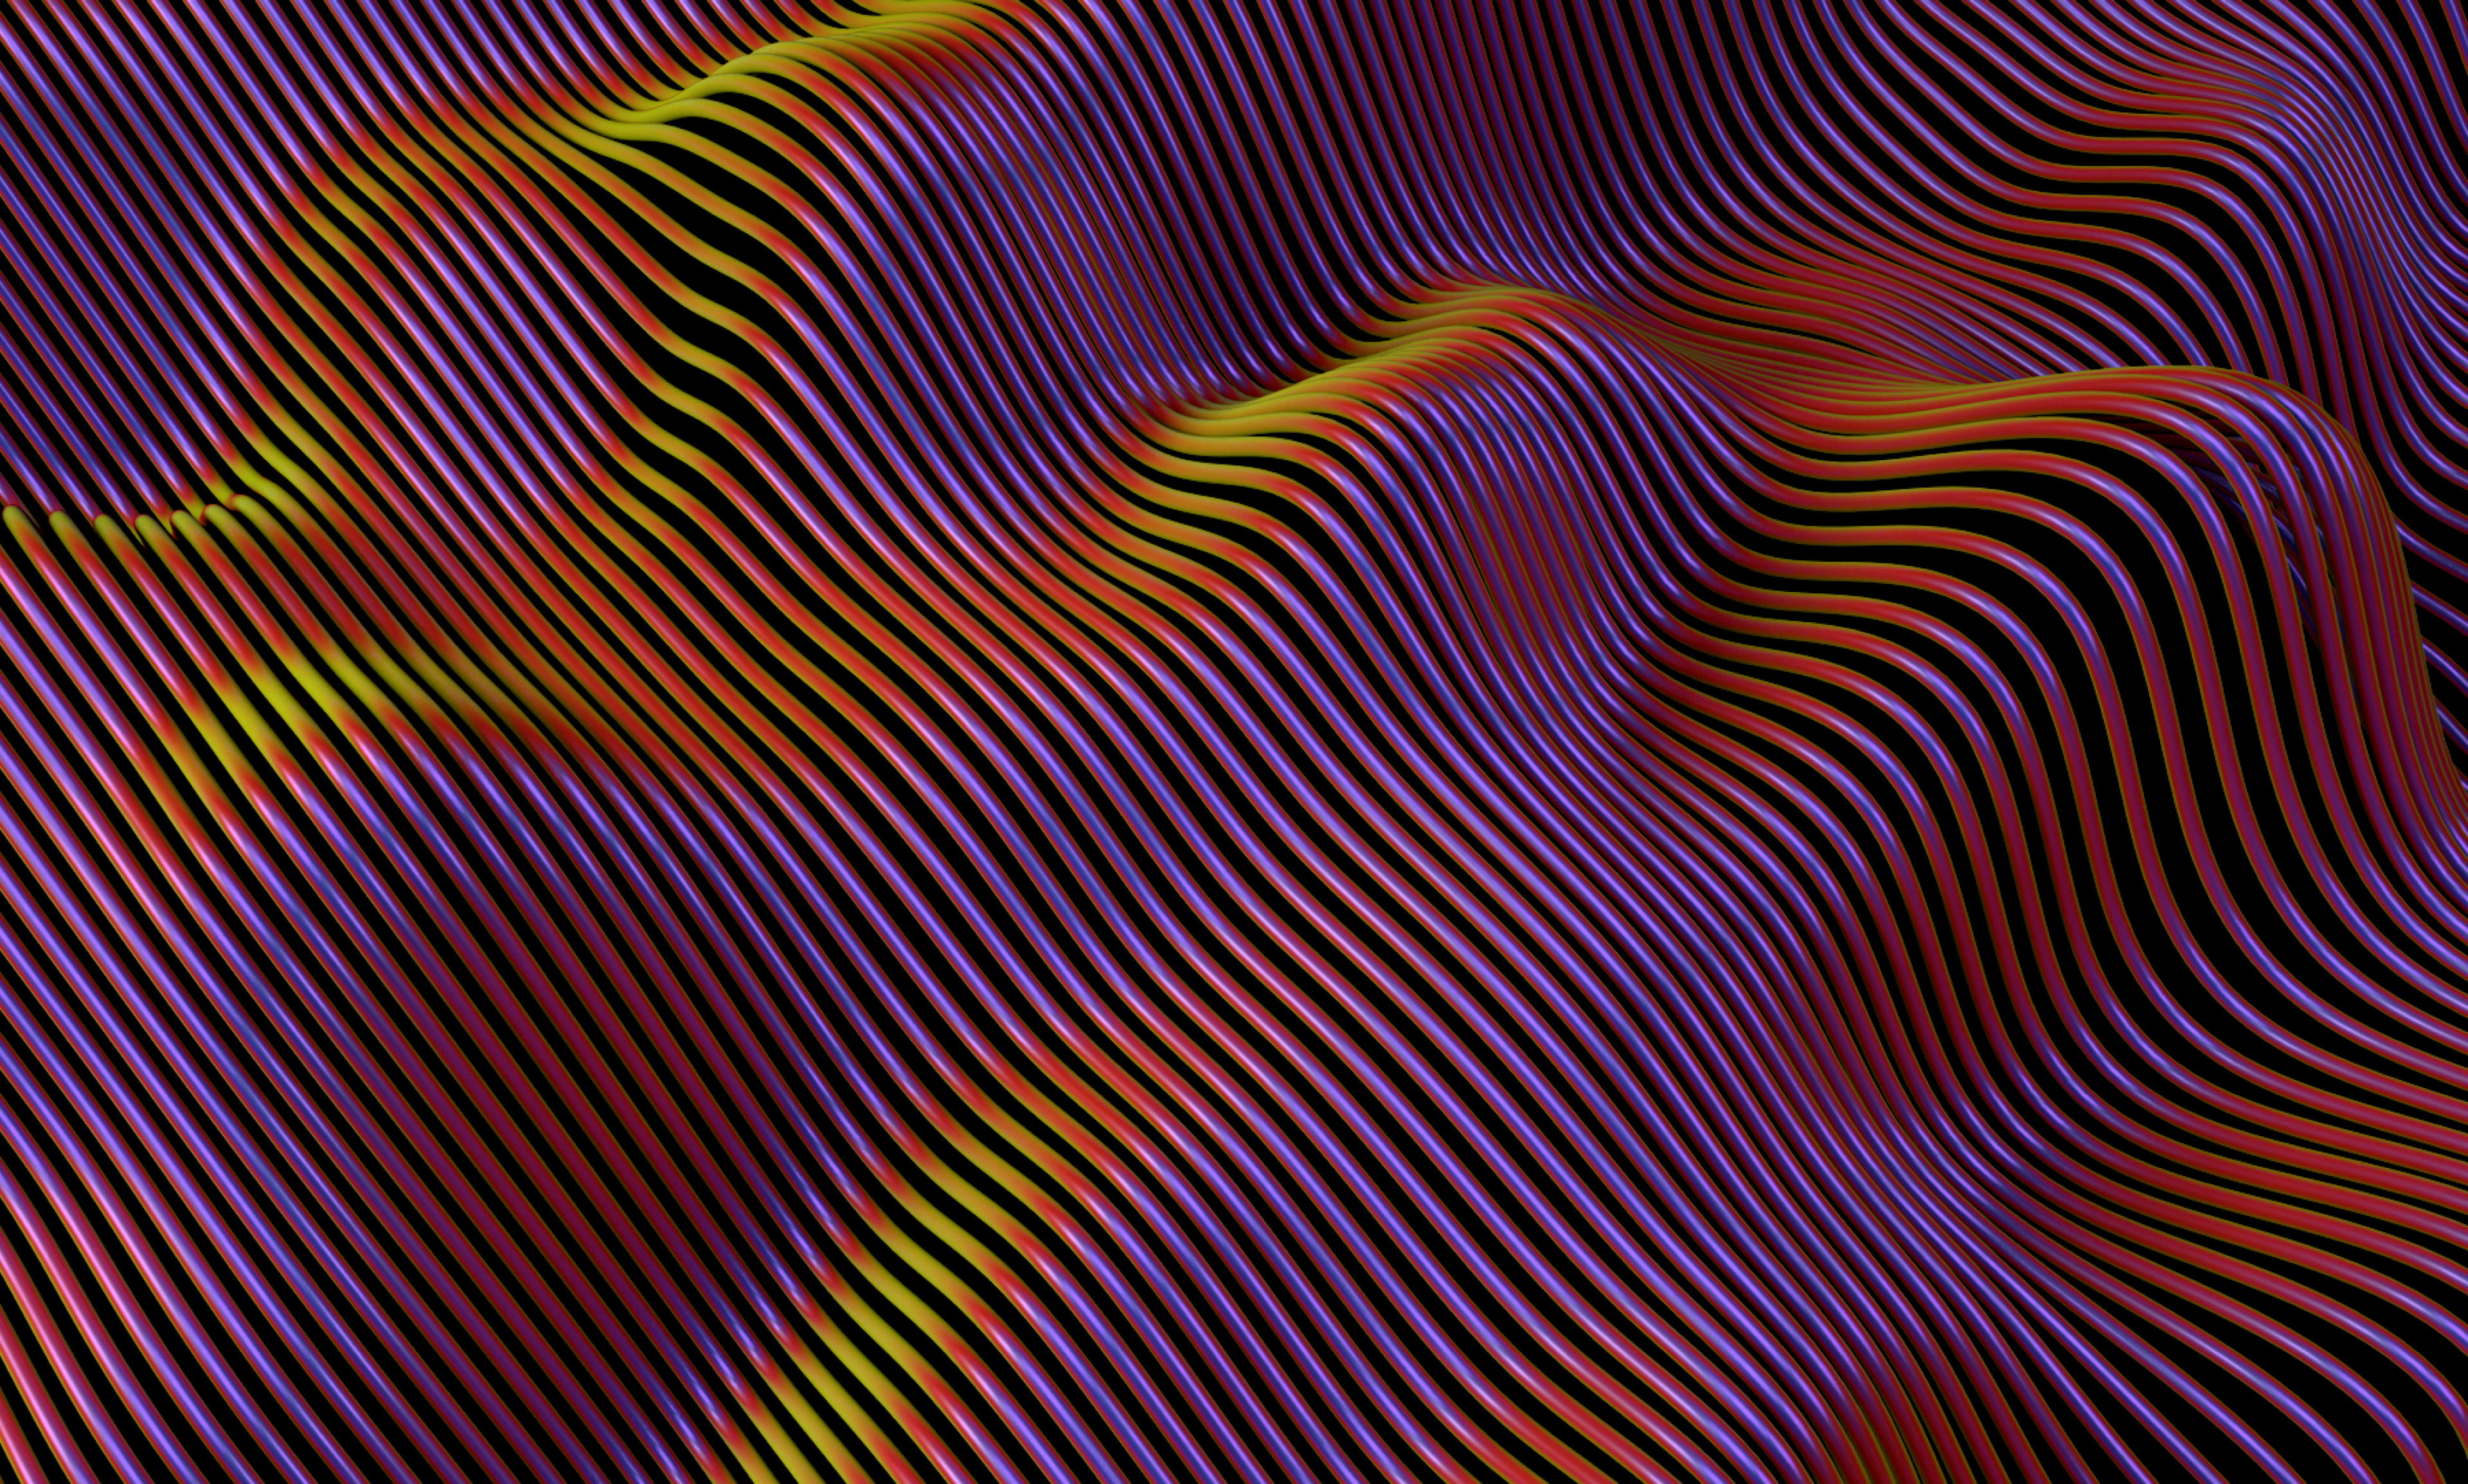 infrared waves made of curved lines on a dark background